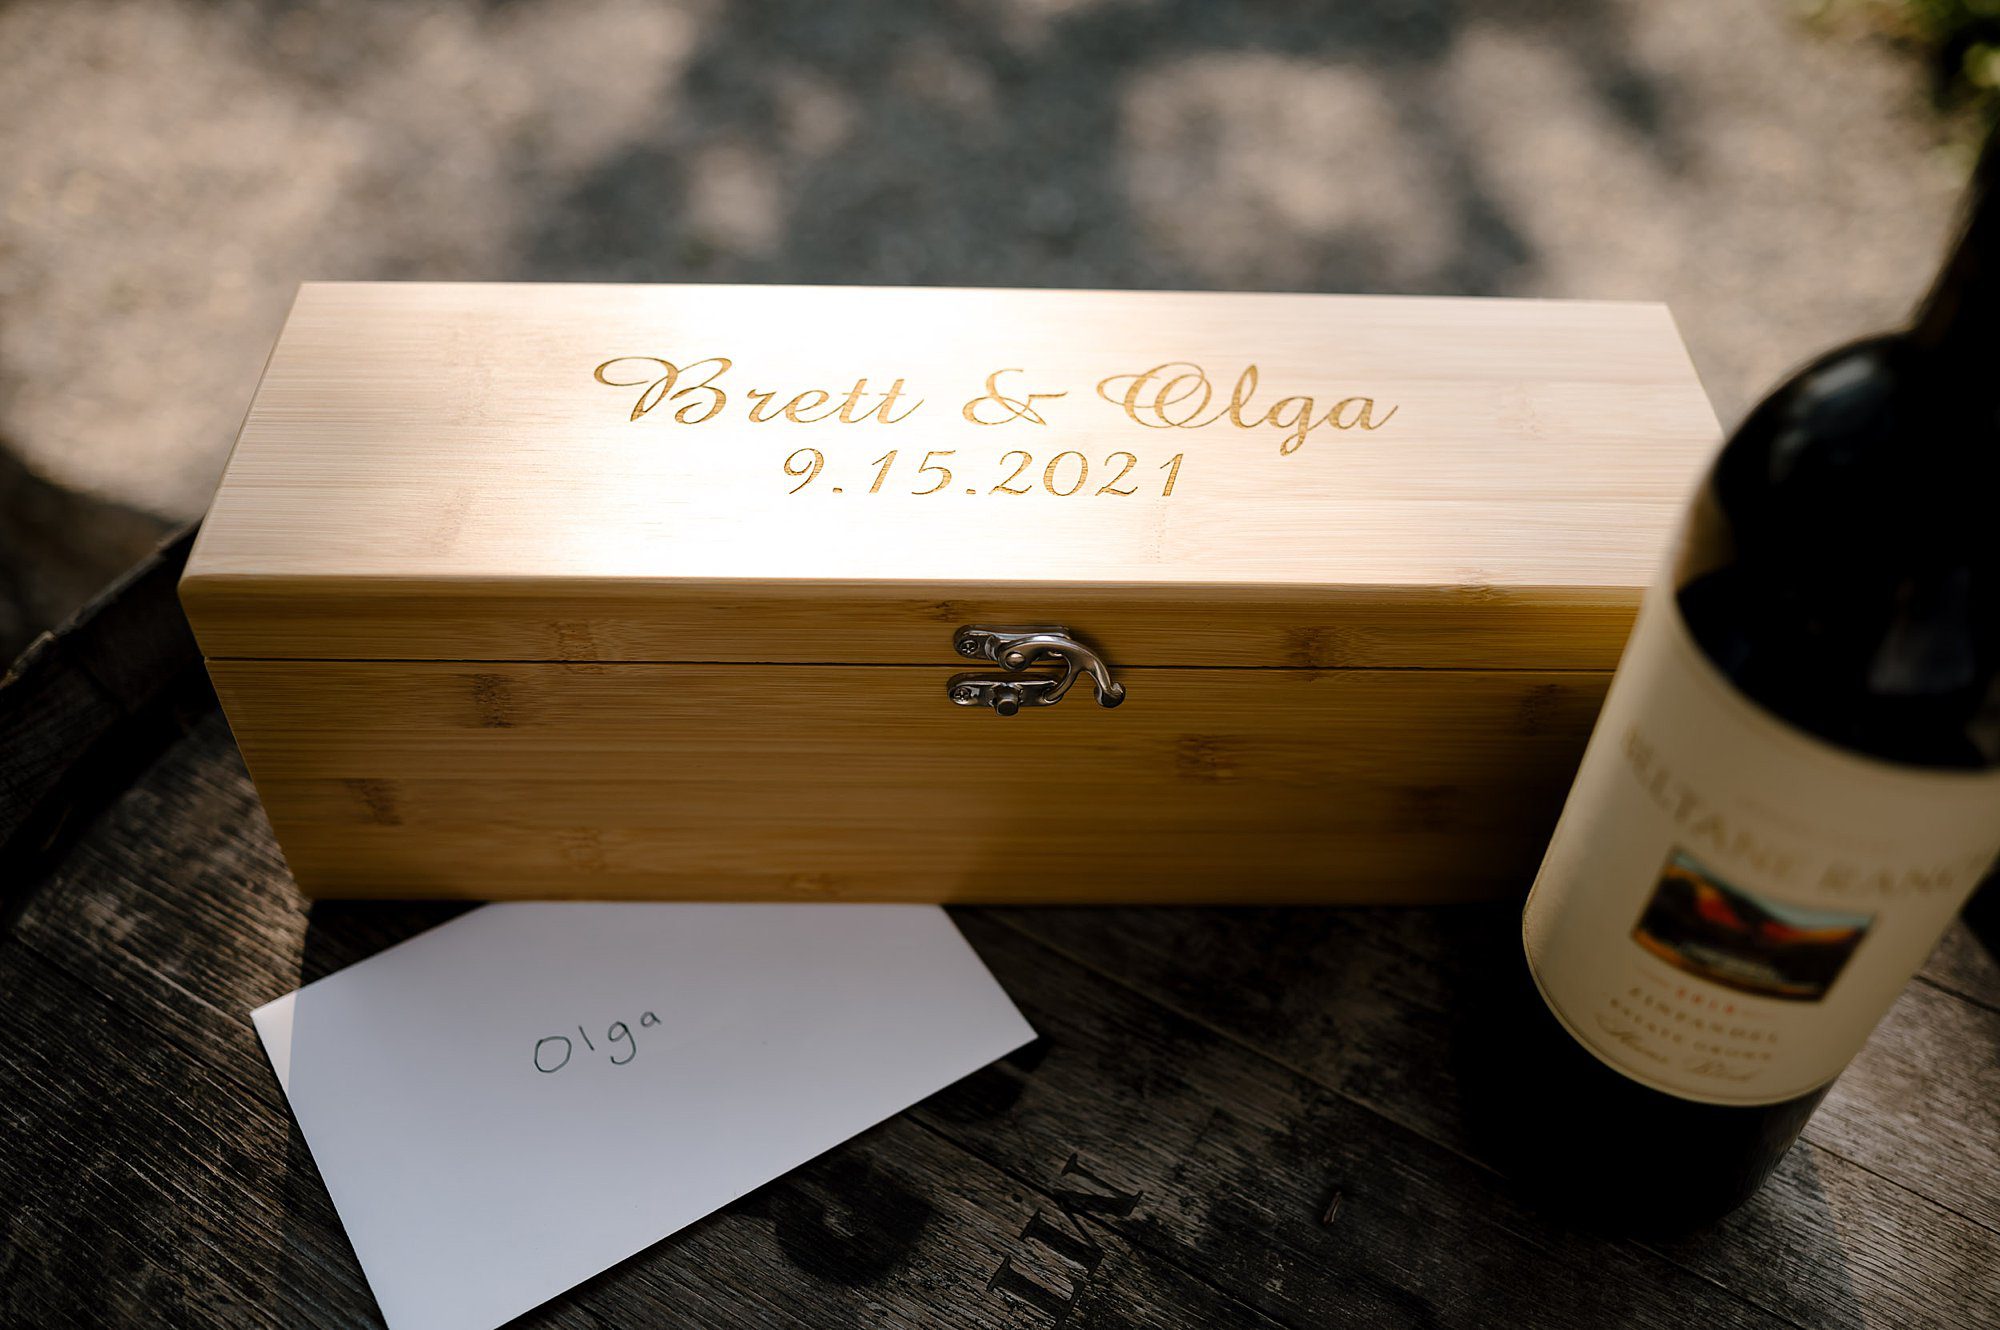 Engraved wine box used during an elopement ceremony at Beltane Ranch in Glen Ellen